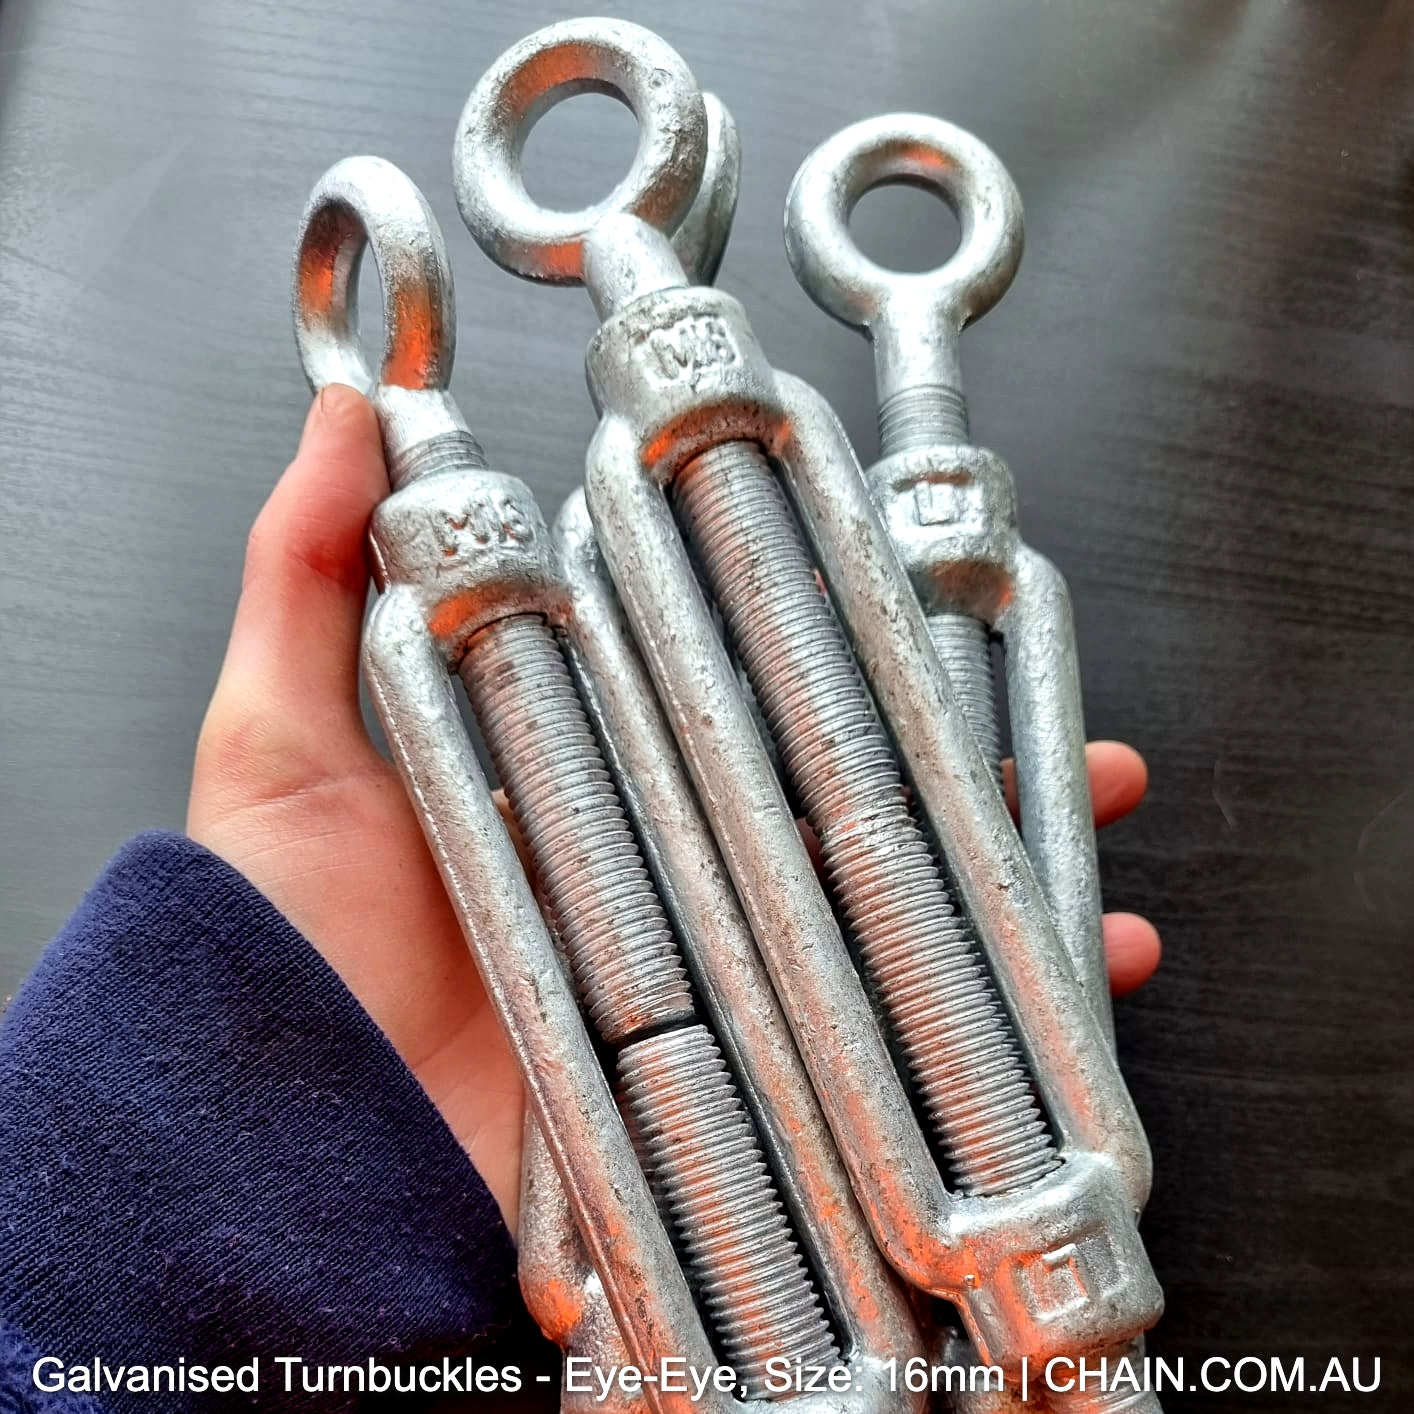 16mm Eye-Eye Turnbuckle Galvanised. Shop hardware online chain.com.au. Australia wide delivery & Melbourne click & collect.